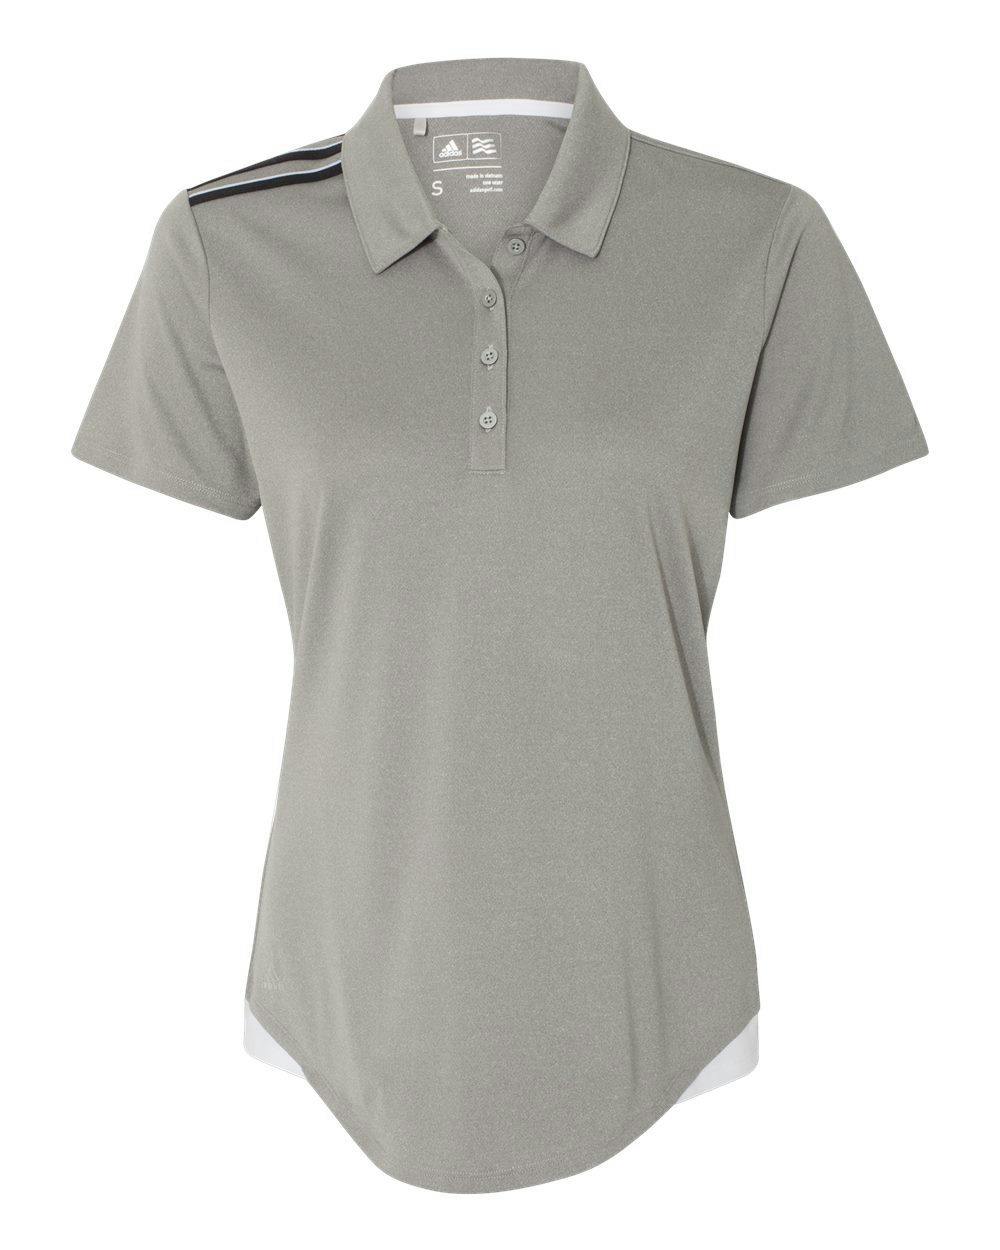 Image for Women's 3-Stripes Shoulder Polo - A235